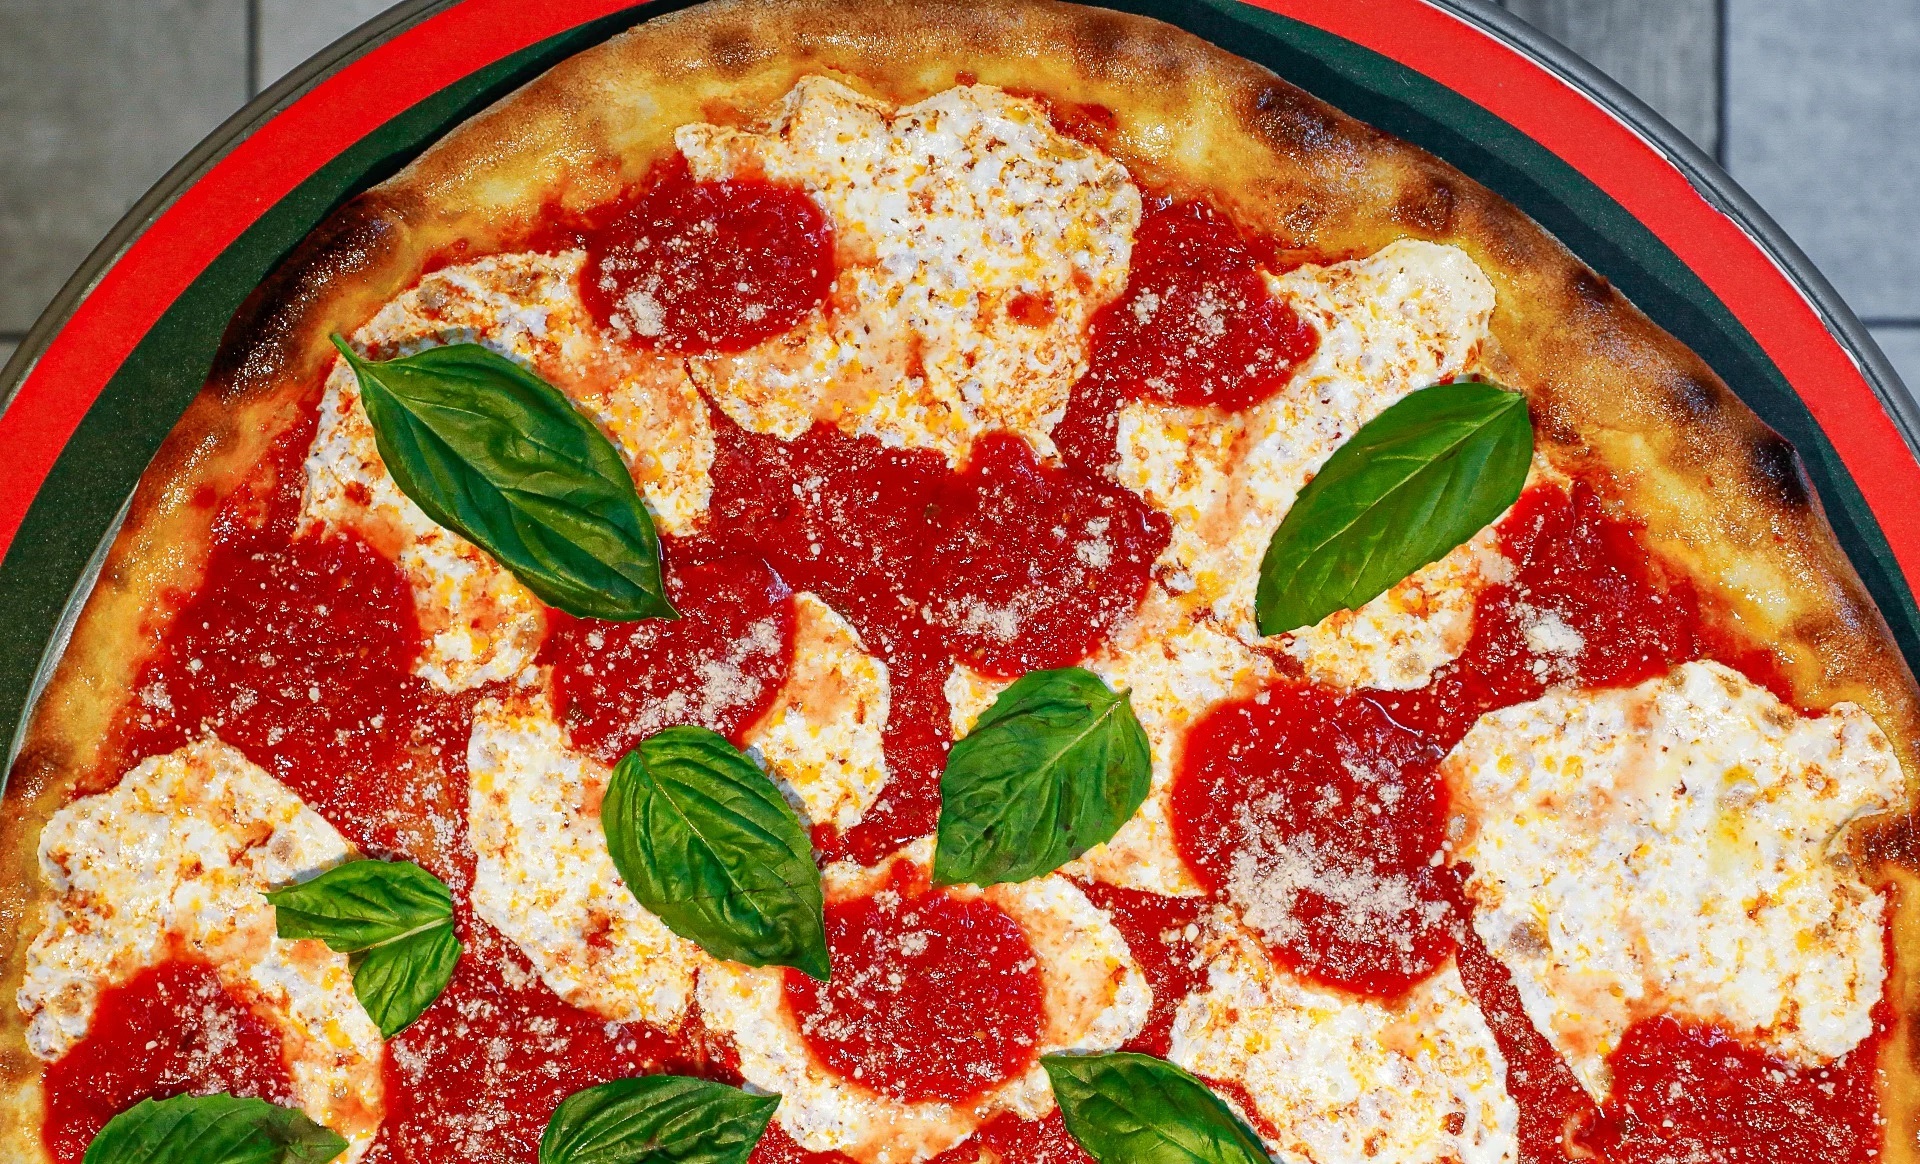 Xeno’s Pizza is launching an inflation-friendly pizza special